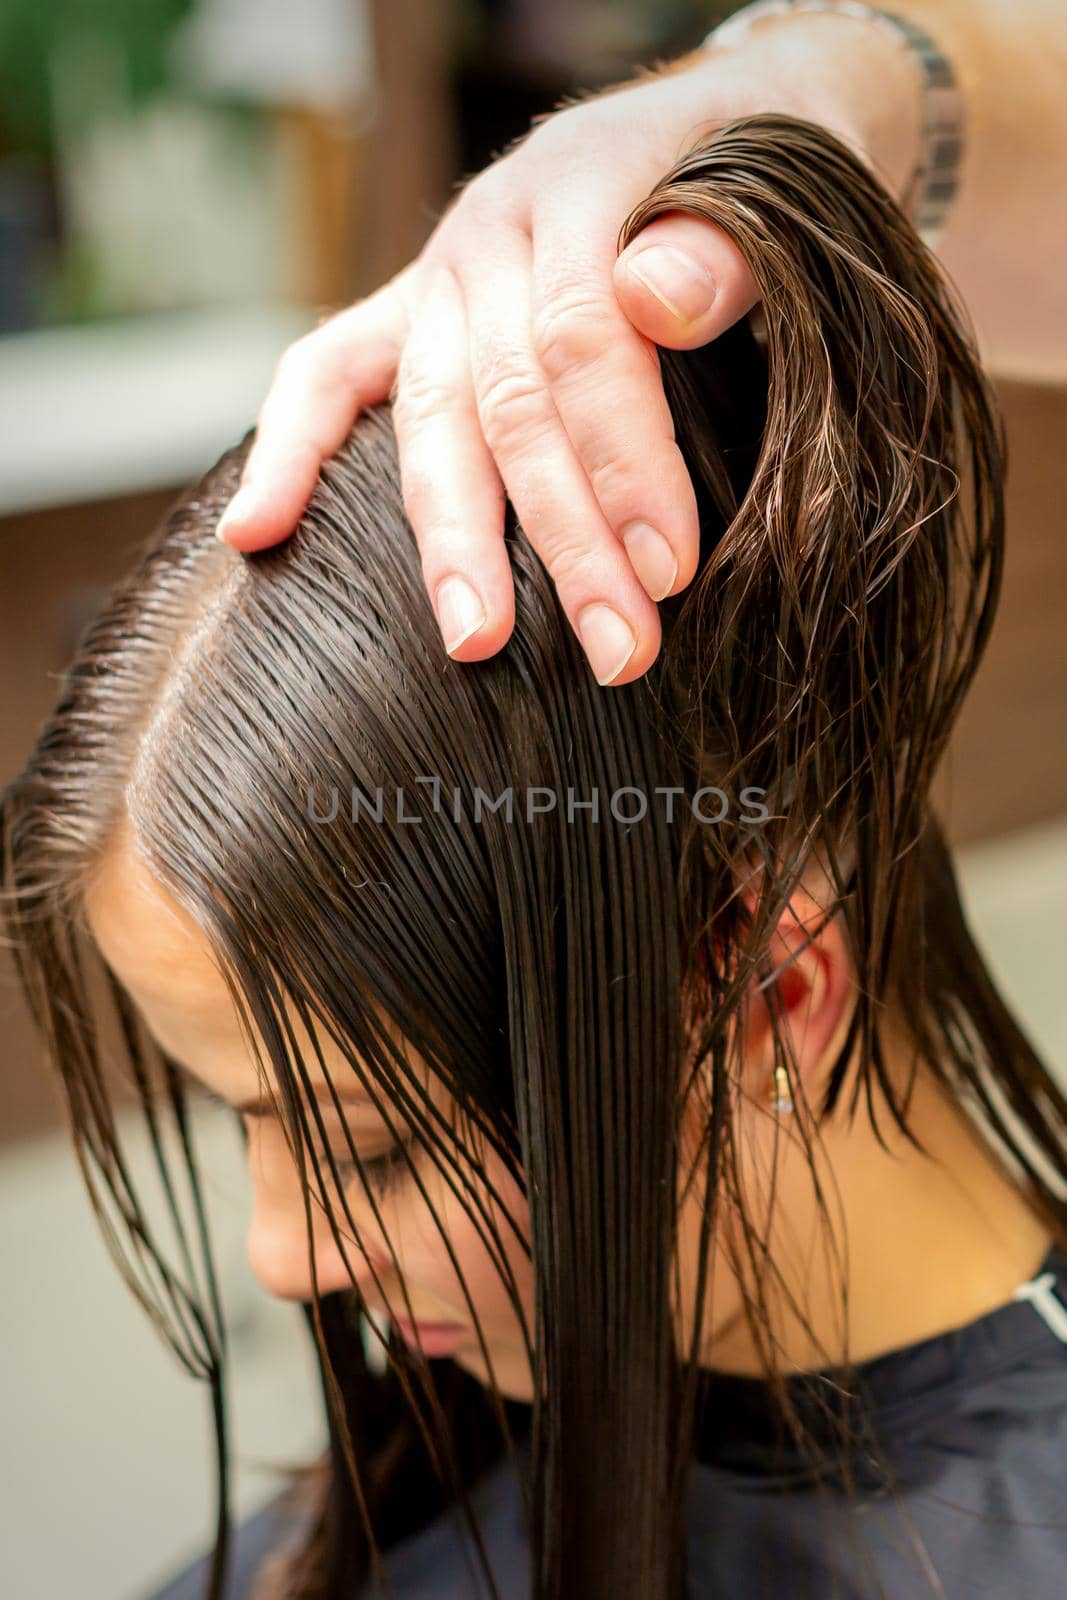 Young woman receiving treatment her hair by hands of professional hairdresser in hair salon